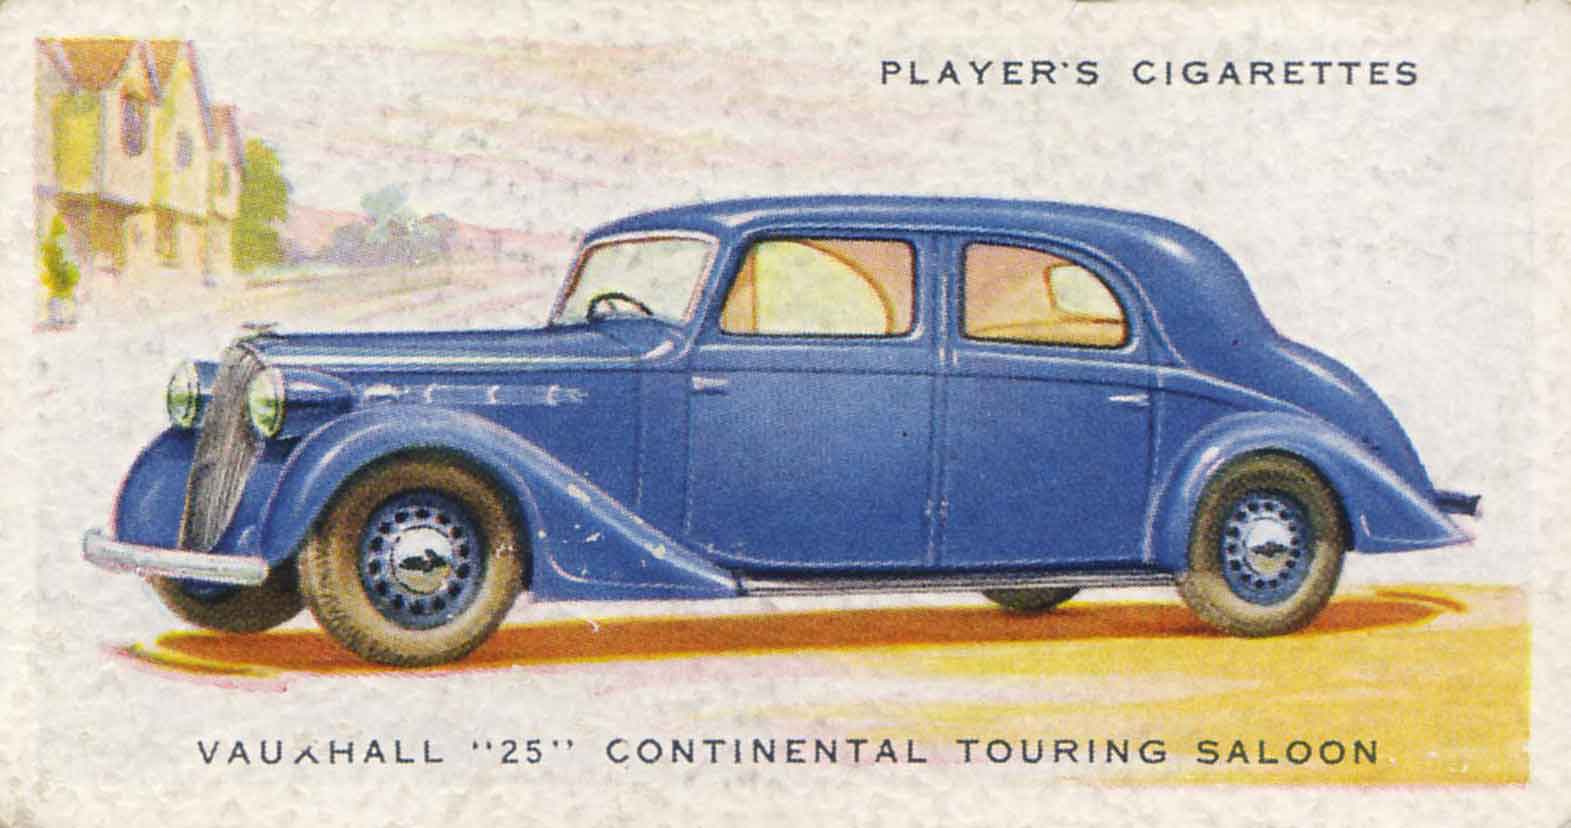 Vauxhall "23" Continental Touring Saloon.. 1937 cigarette card.